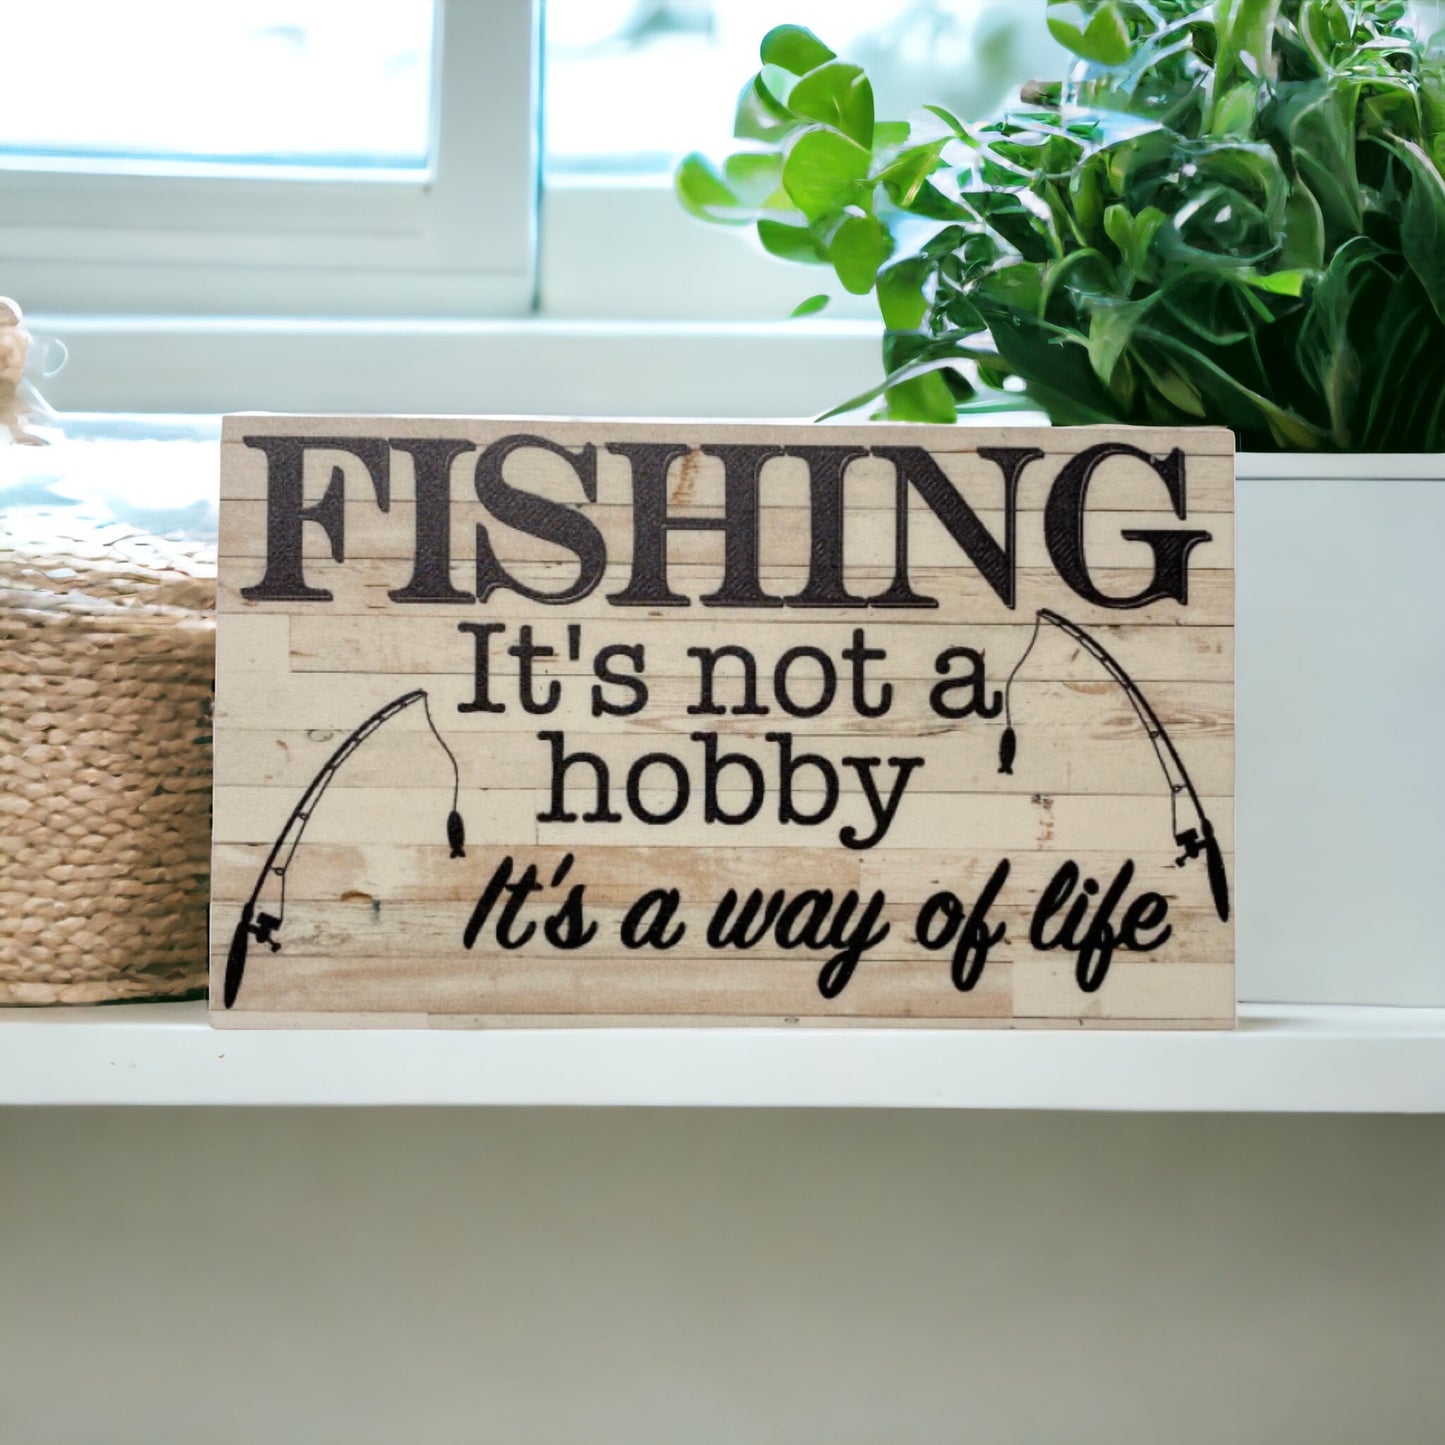 Fishing It's Not A Hobby Way Of Life Sign - The Renmy Store Homewares & Gifts 